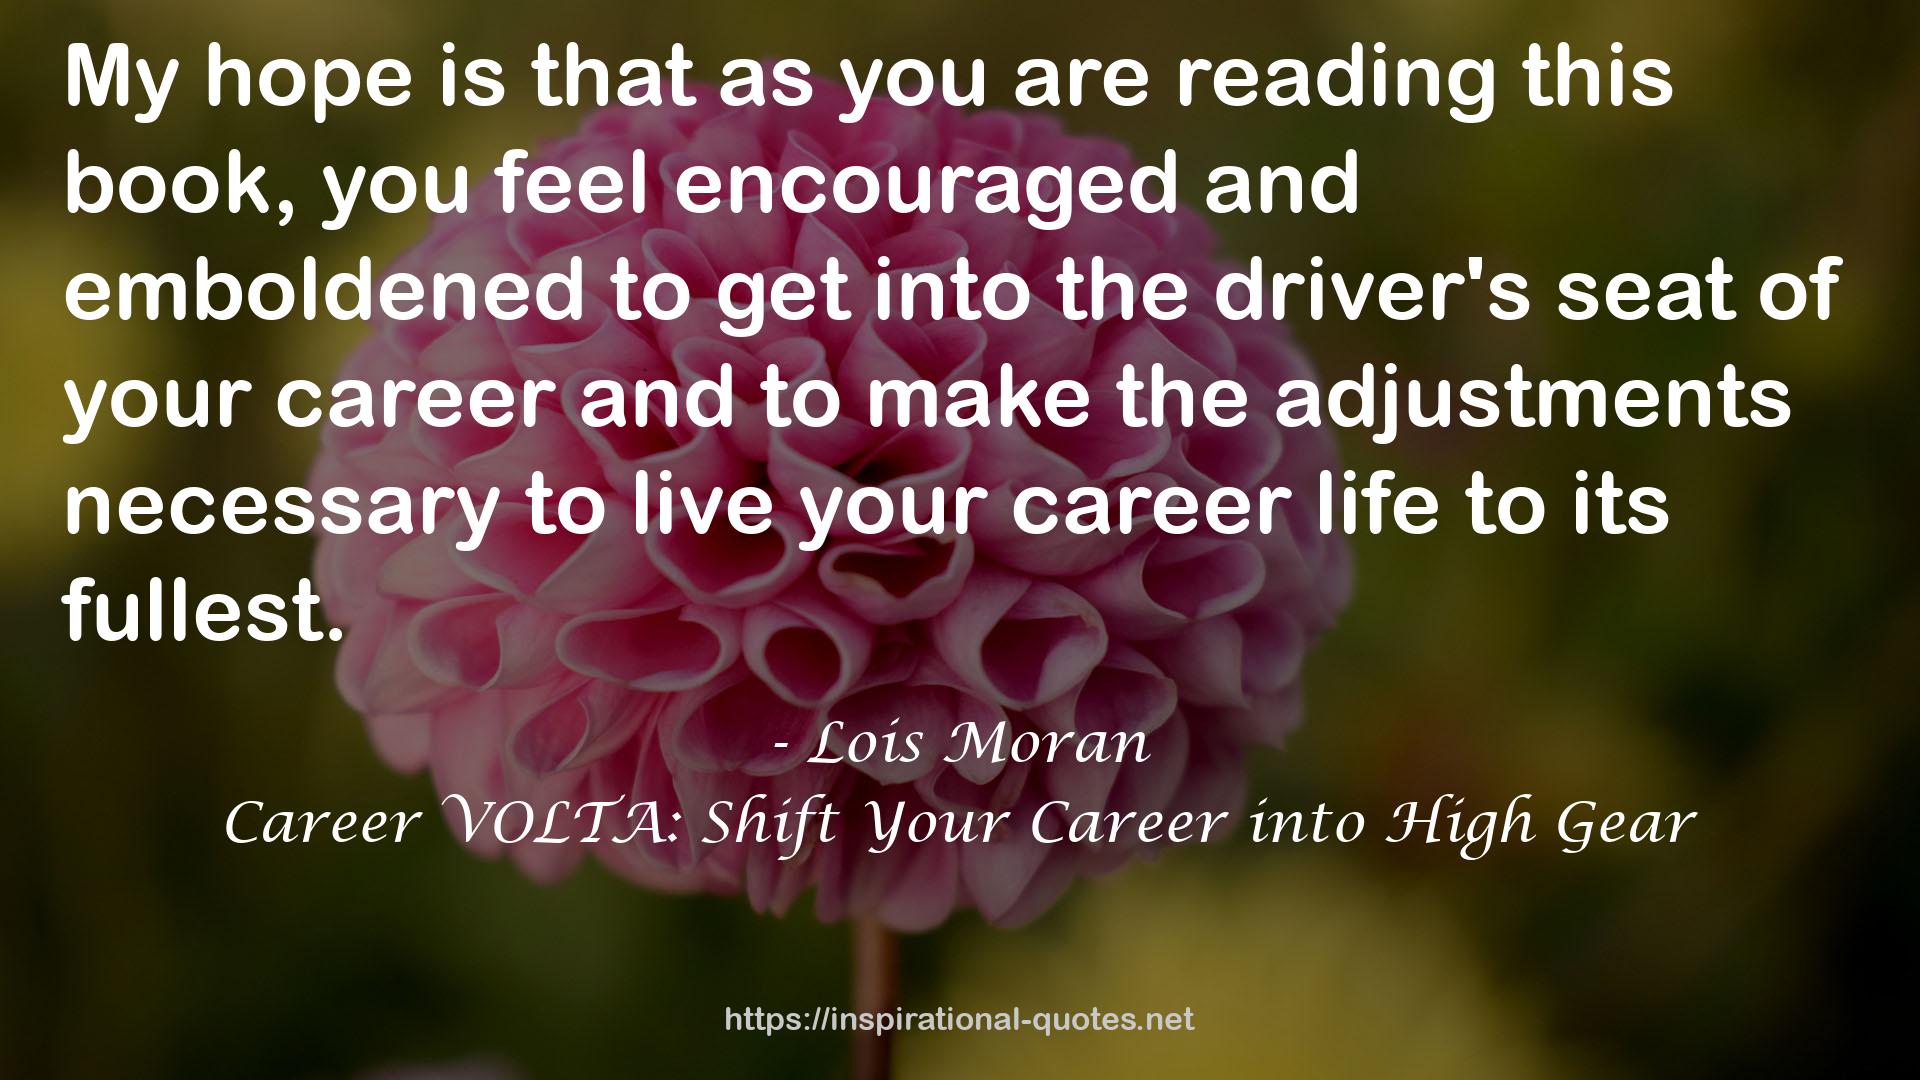 Career VOLTA: Shift Your Career into High Gear QUOTES